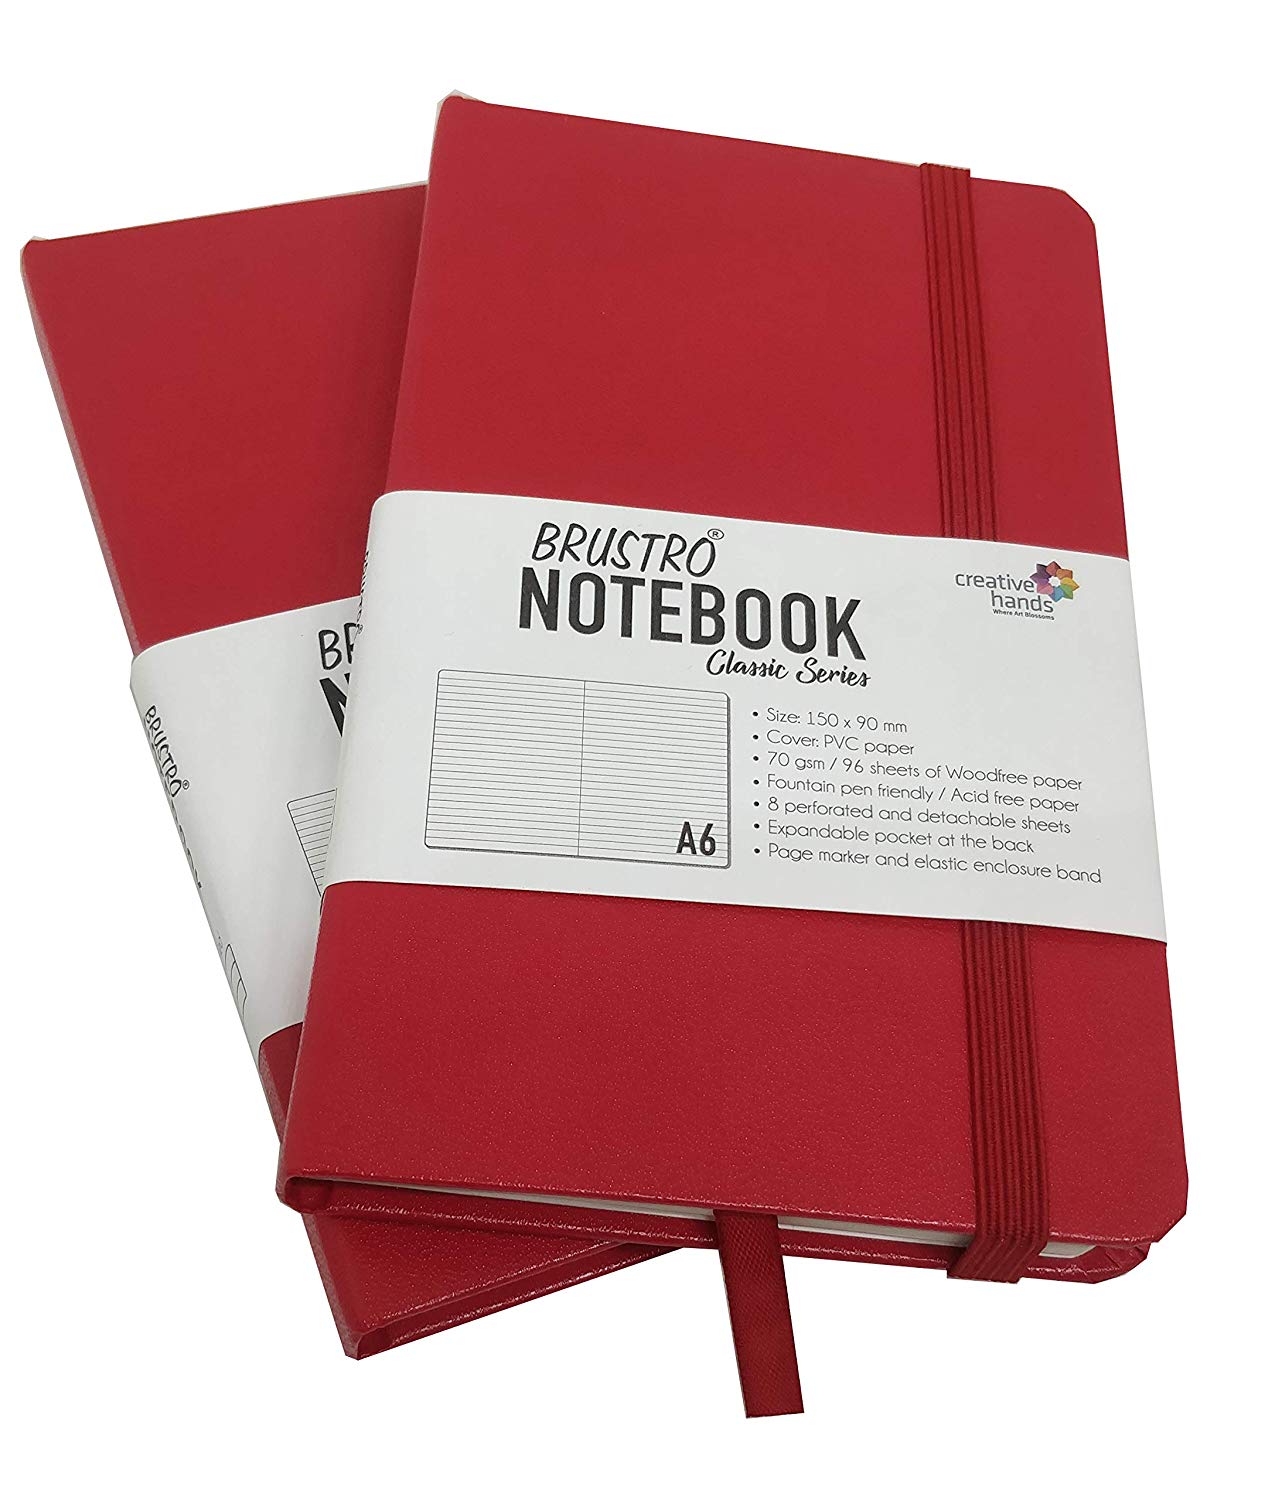 BRUSTRO NOTEBOOK CLASSIC SERIES TWIN PACK A6